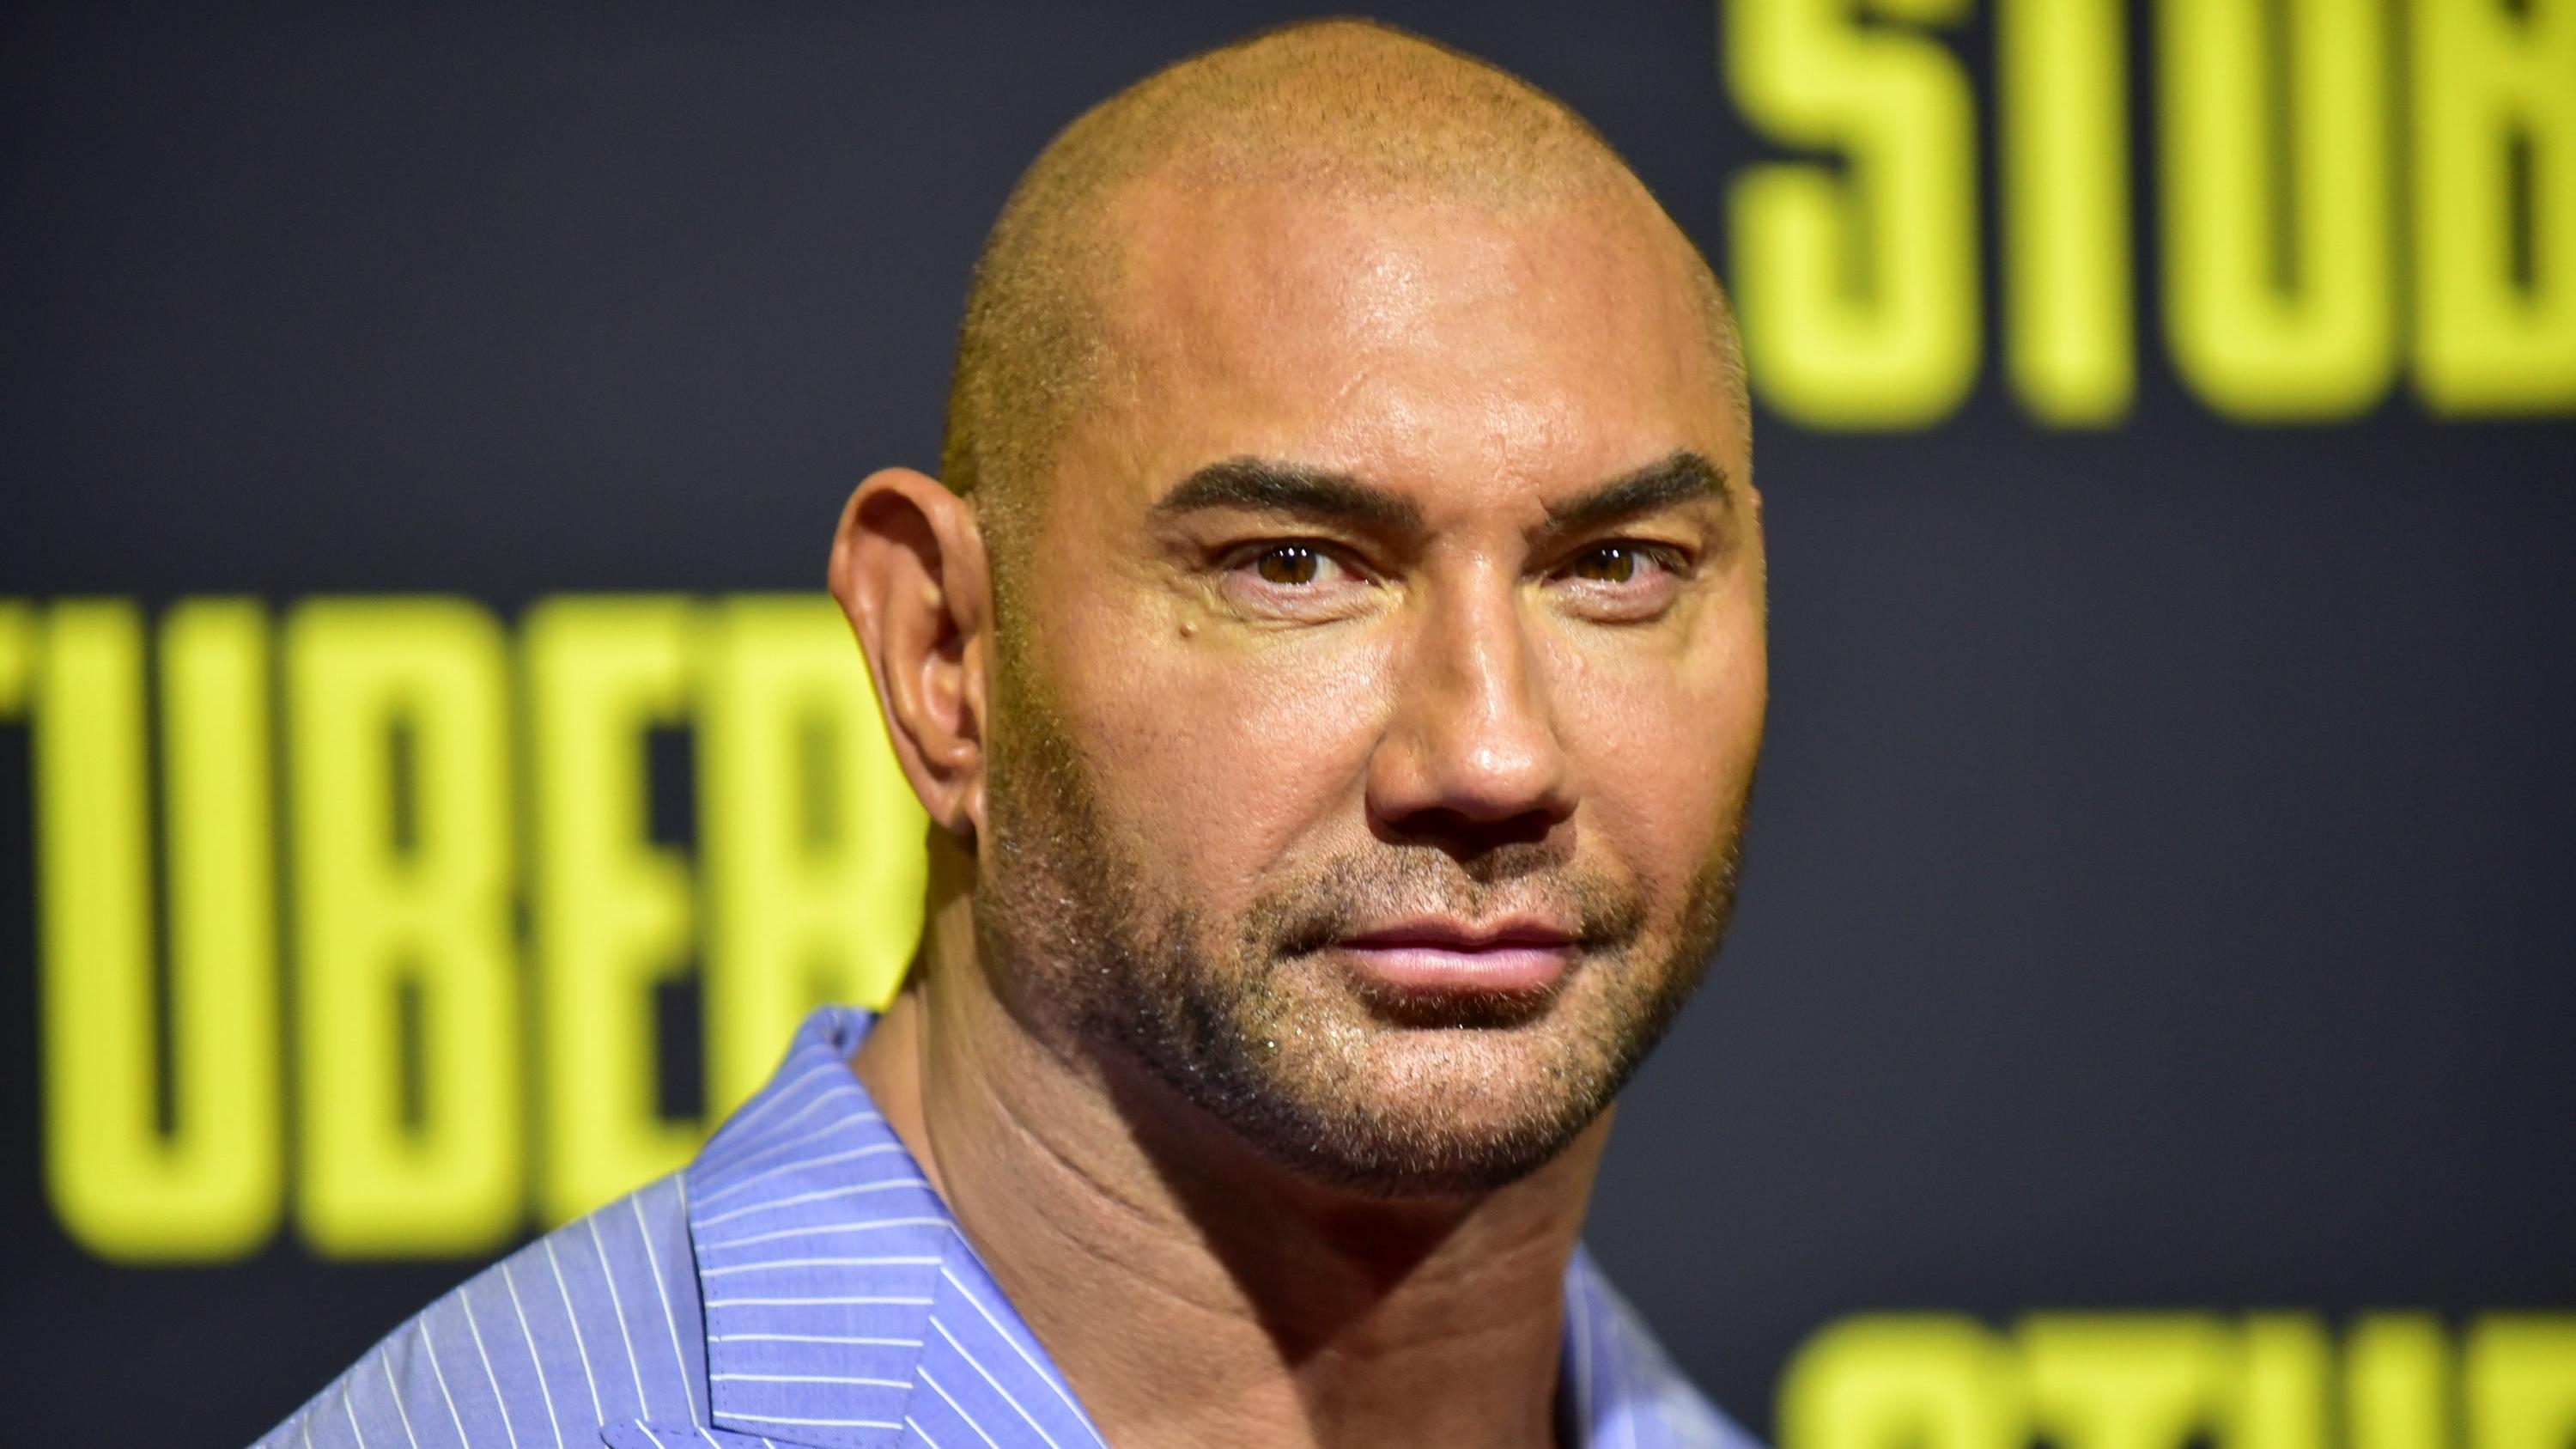 Dave Bautista has a big request: Let him play Ernest Hemingway